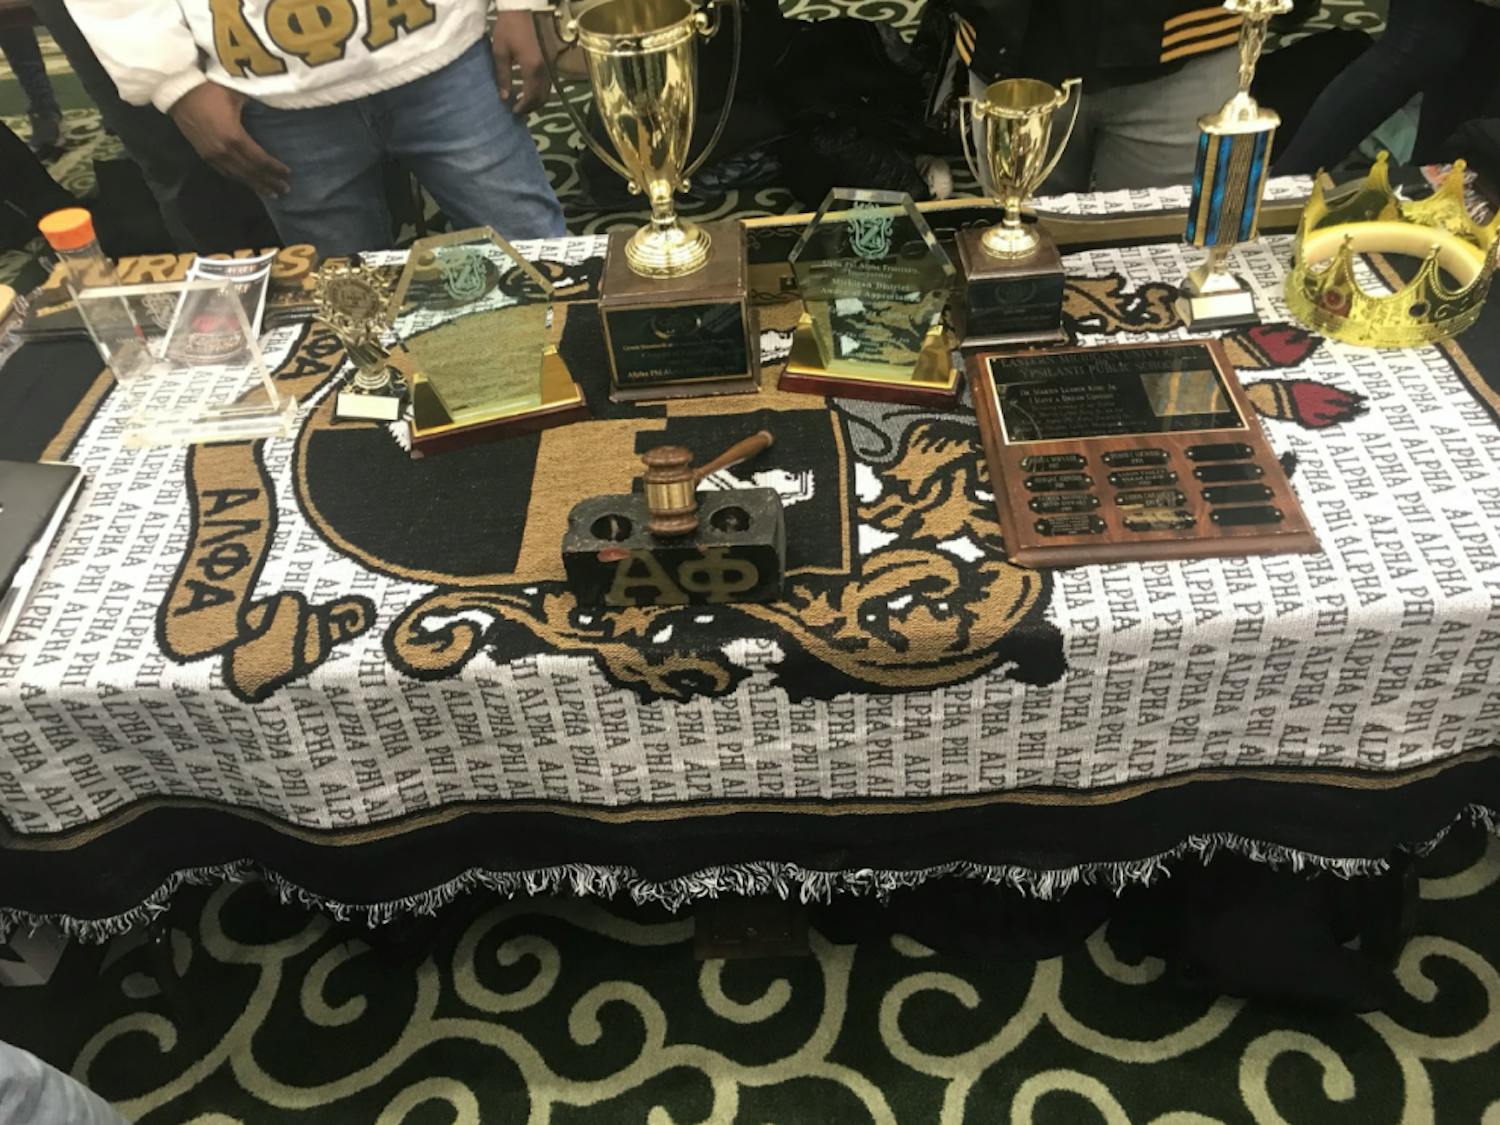 A table for one of the org's at Winter Fest